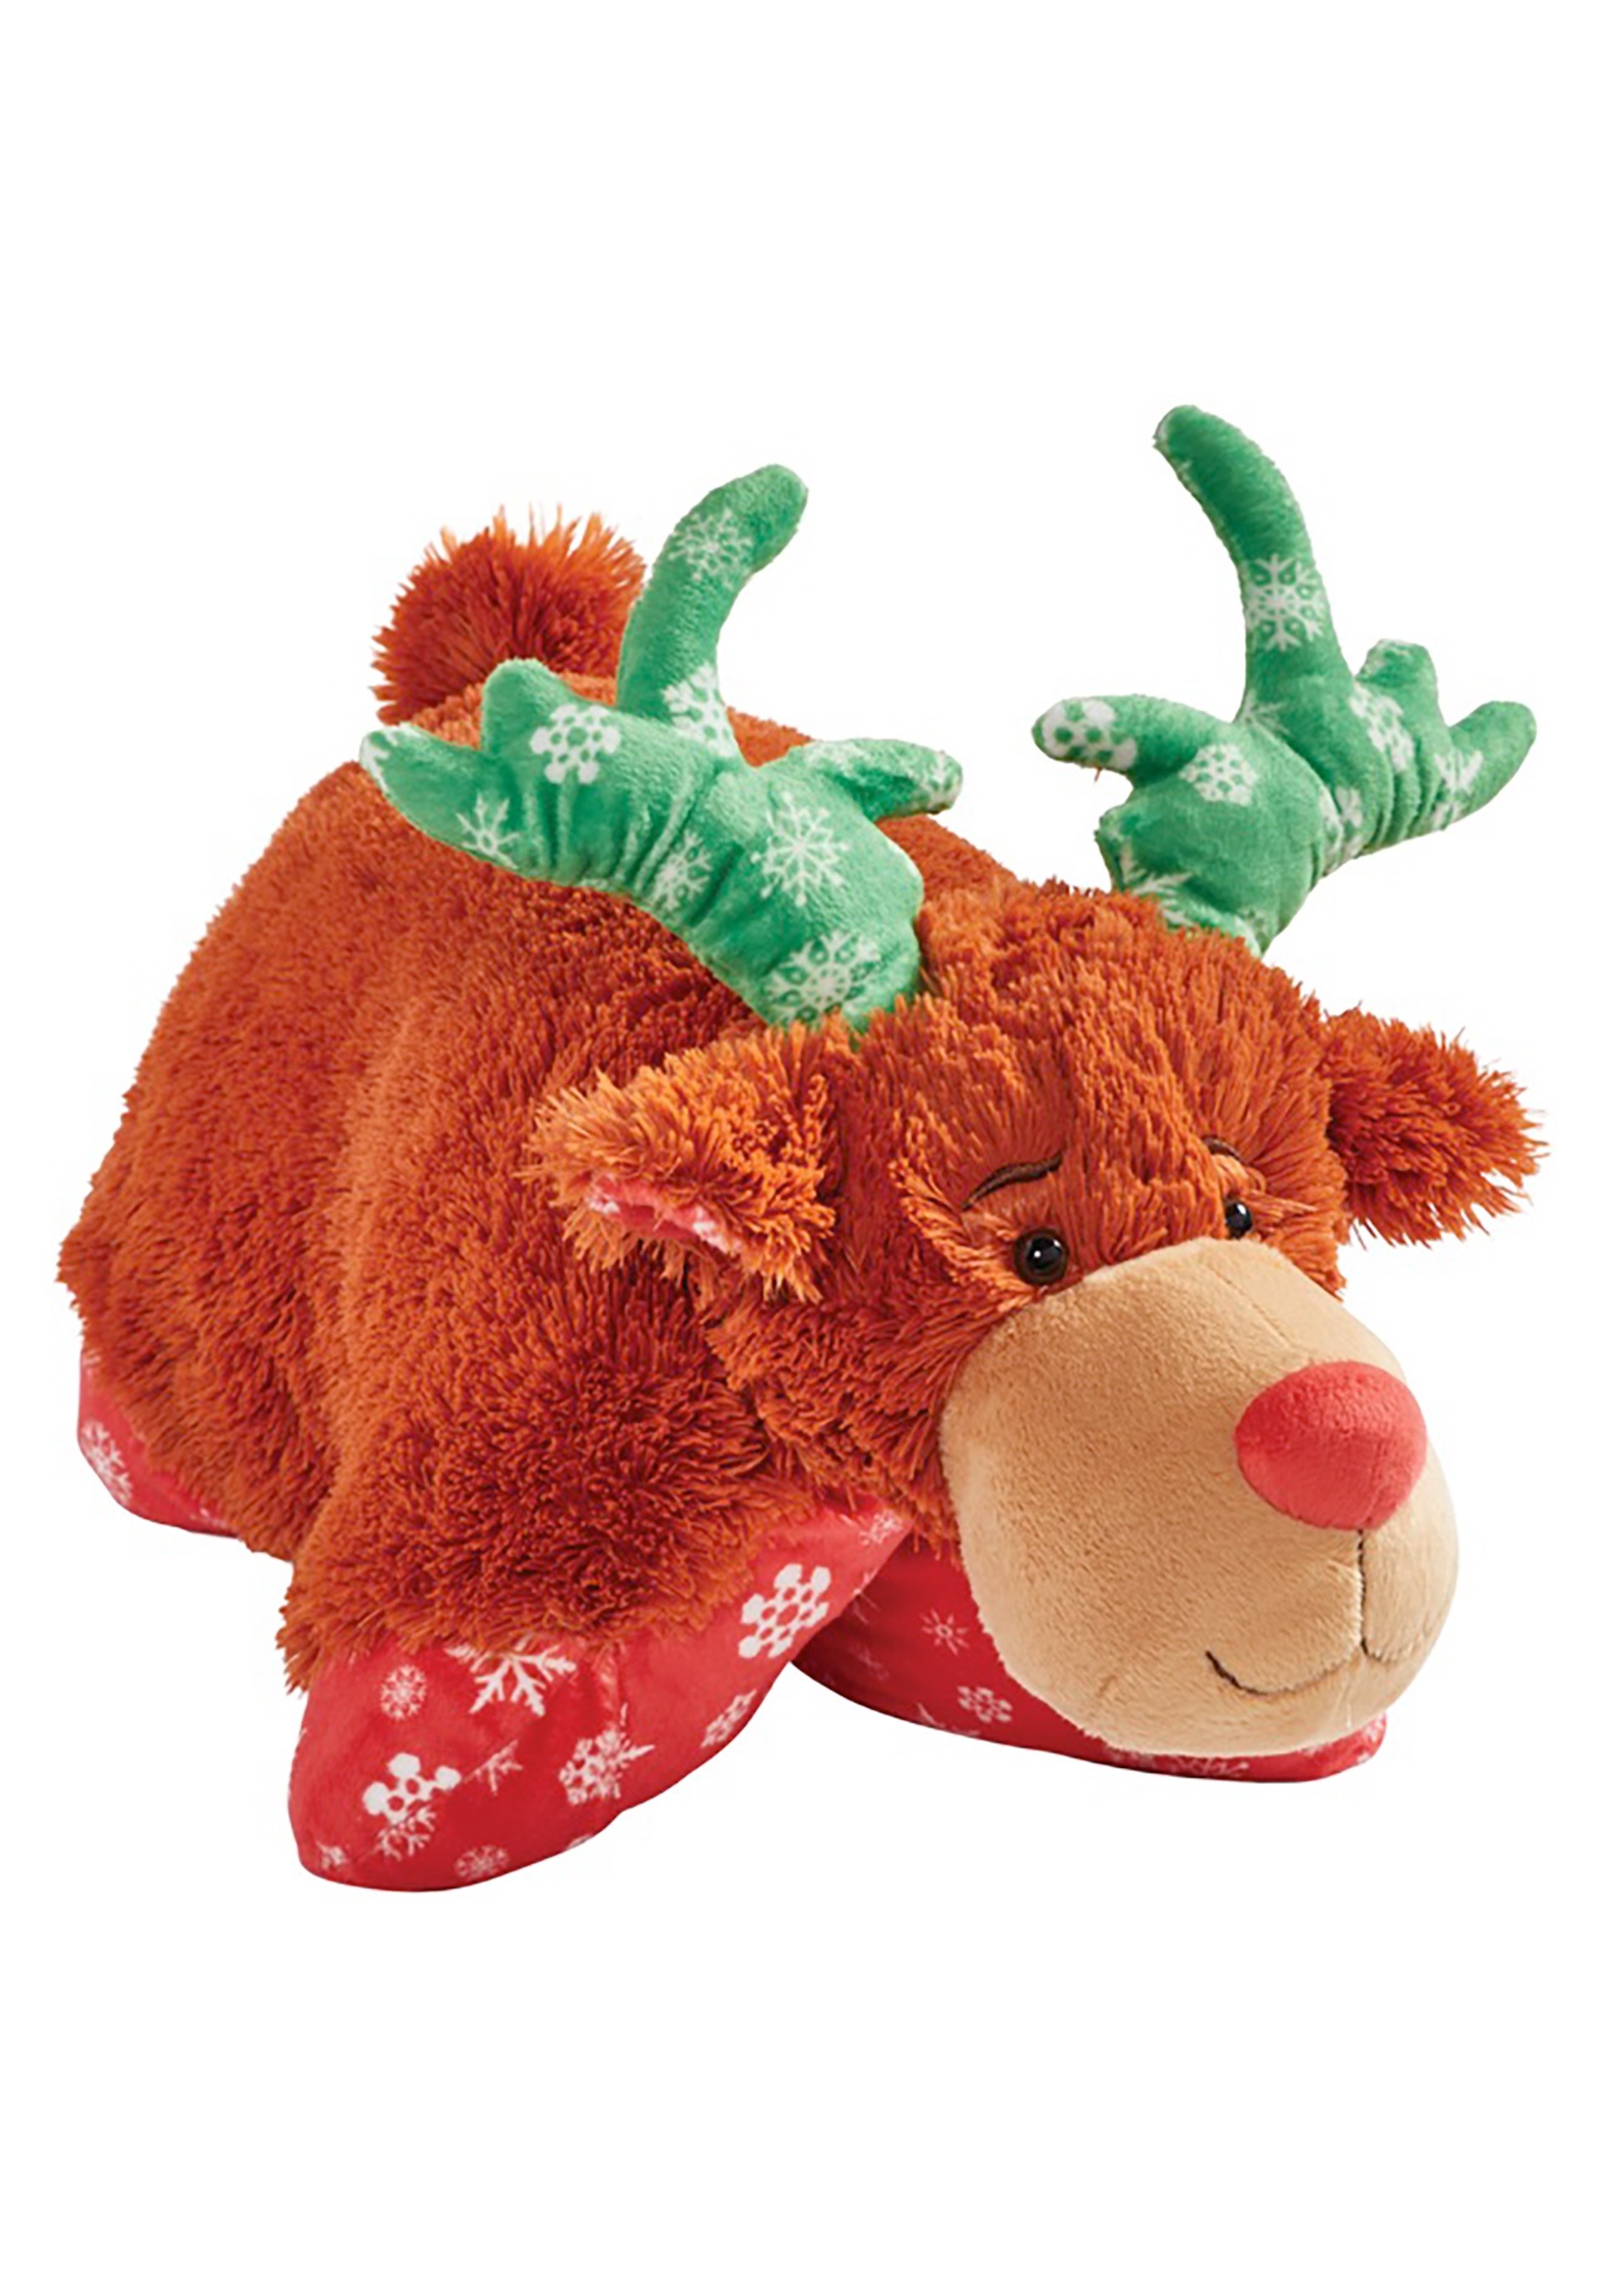 Authentic Pillow Pets Holiday Reindeer 16" Plush Toy Gift